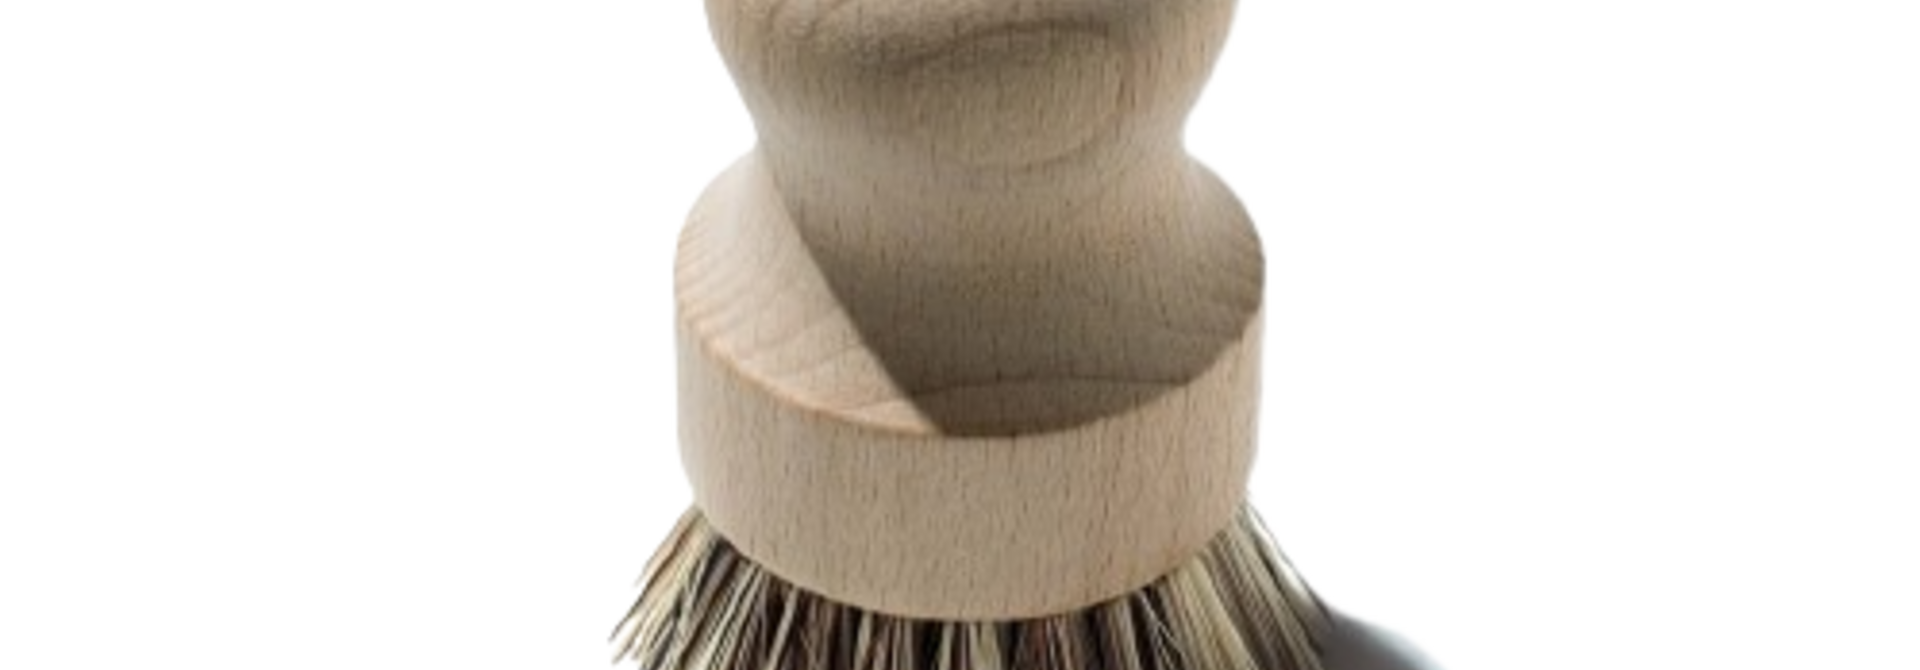 Dish Scrubber | The Home Care Collection, Natural Wood - 2 Inch x 2 Inch x 2.5 Inch